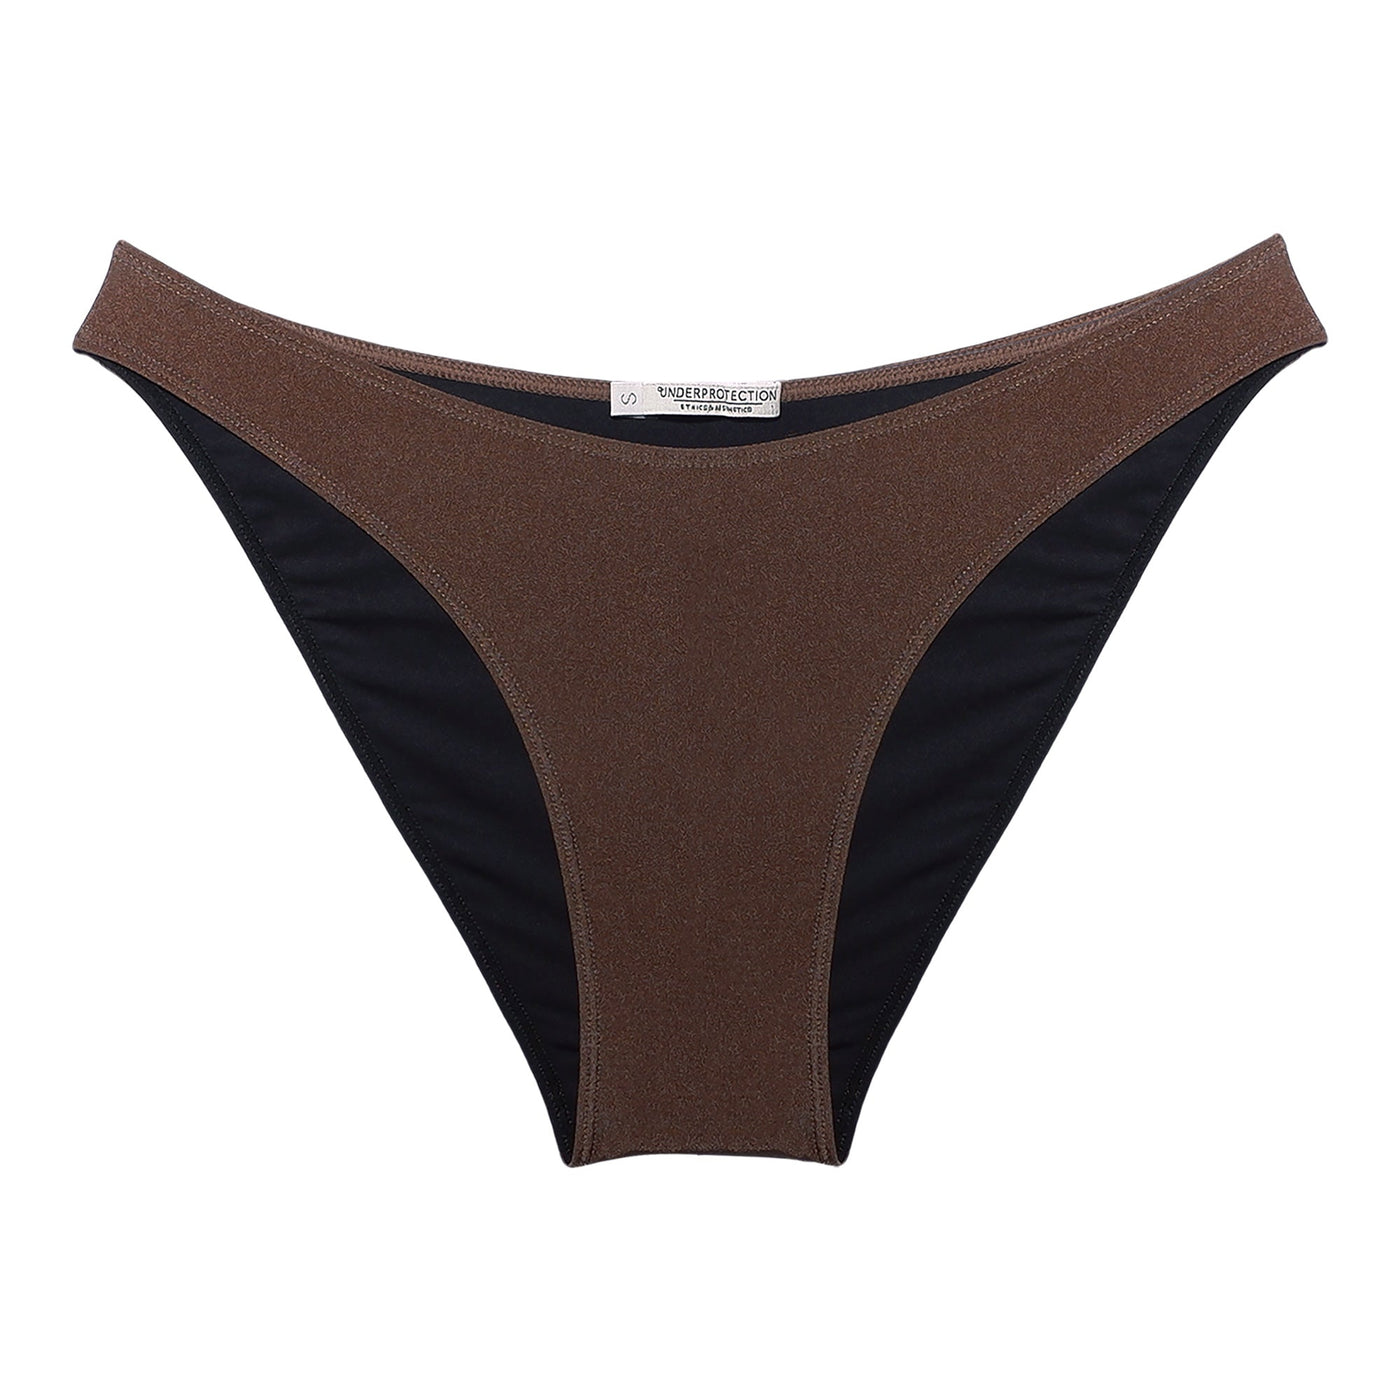 Underprotection Rose Briefs Brown.